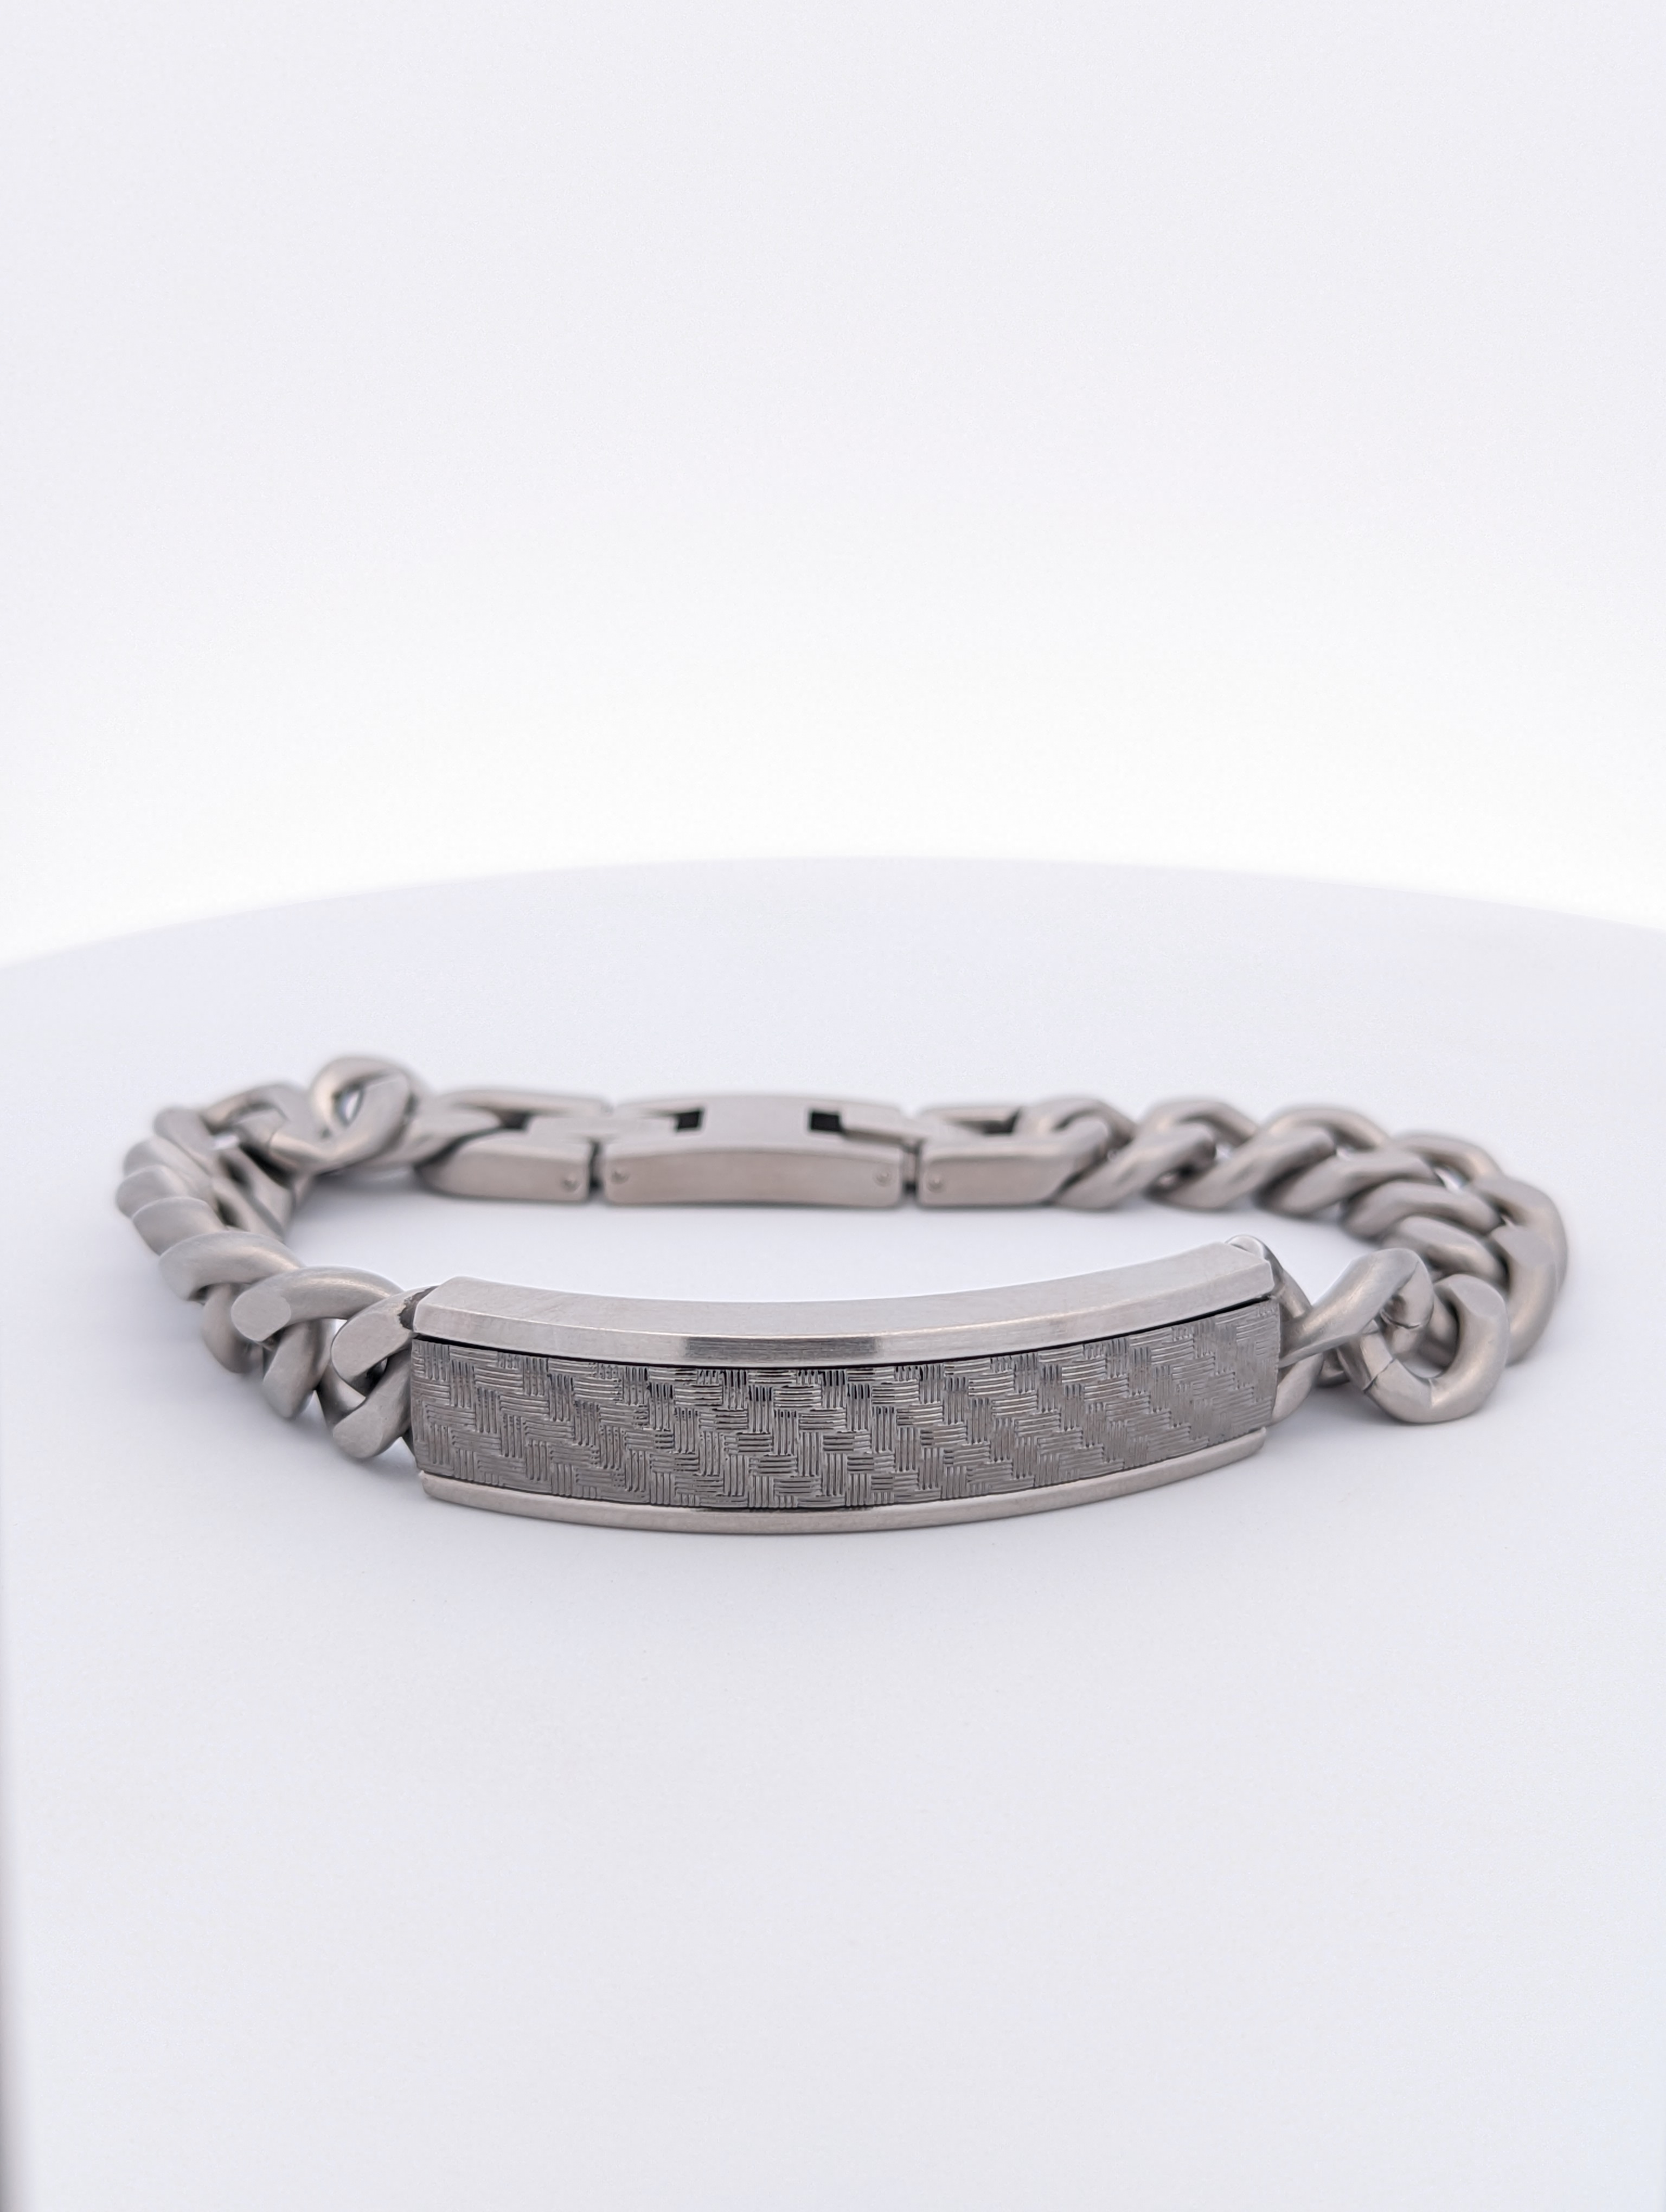 Amazing Tips for Choosing the Right Bracelet to Complement Your Style || silver fusion men's bracelet ||